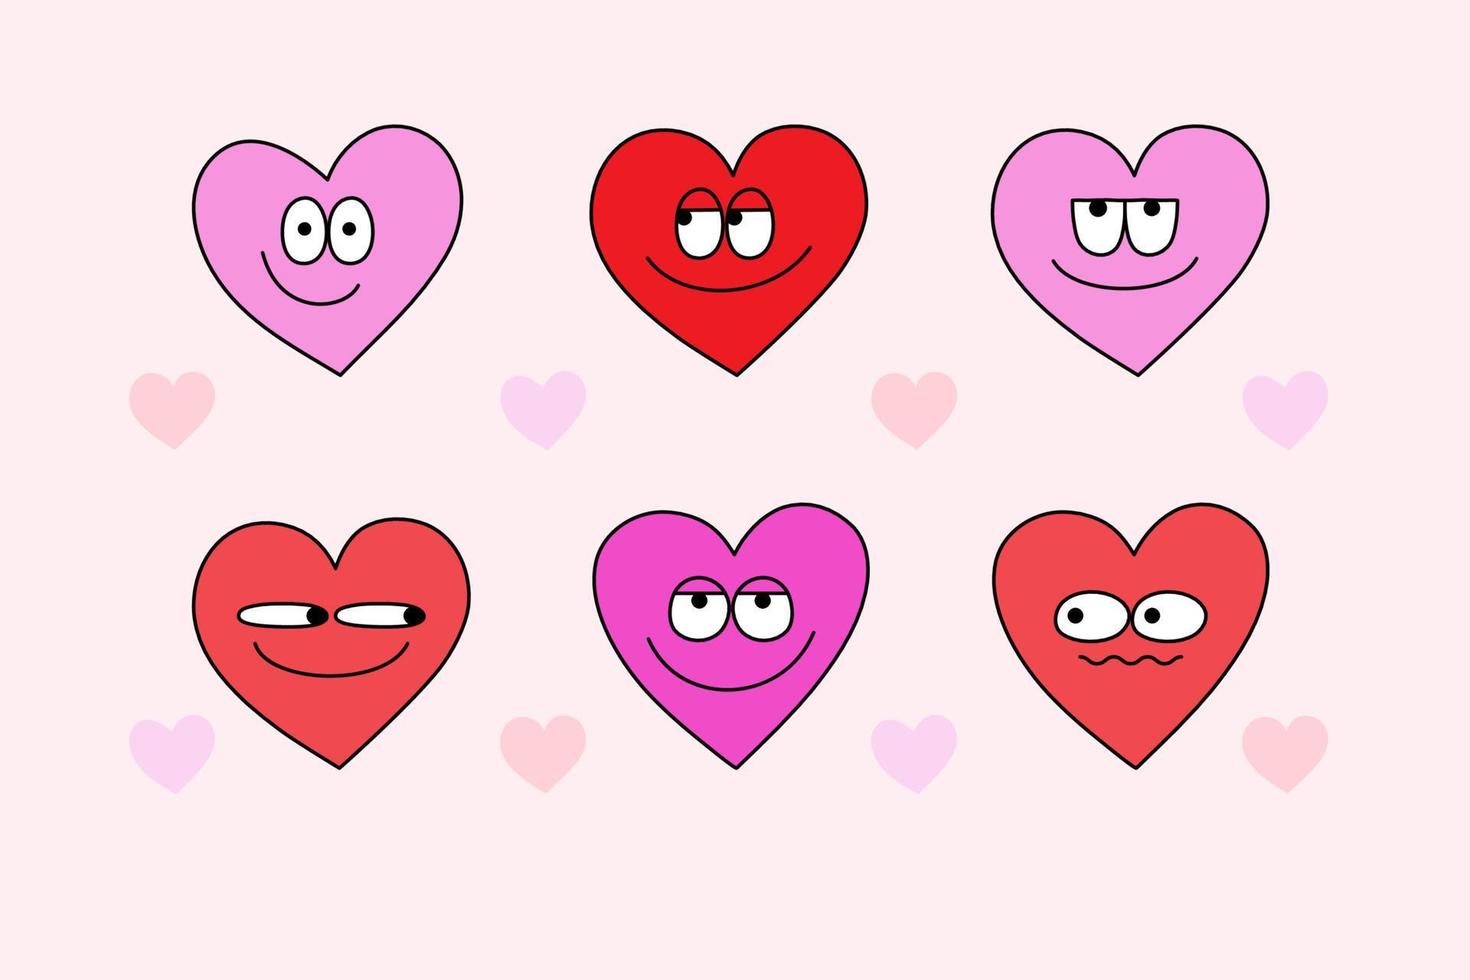 70s groovy heart cartoon character set. Hand drawn funky heart stickers in retro style for valentines day greeting cards. vector